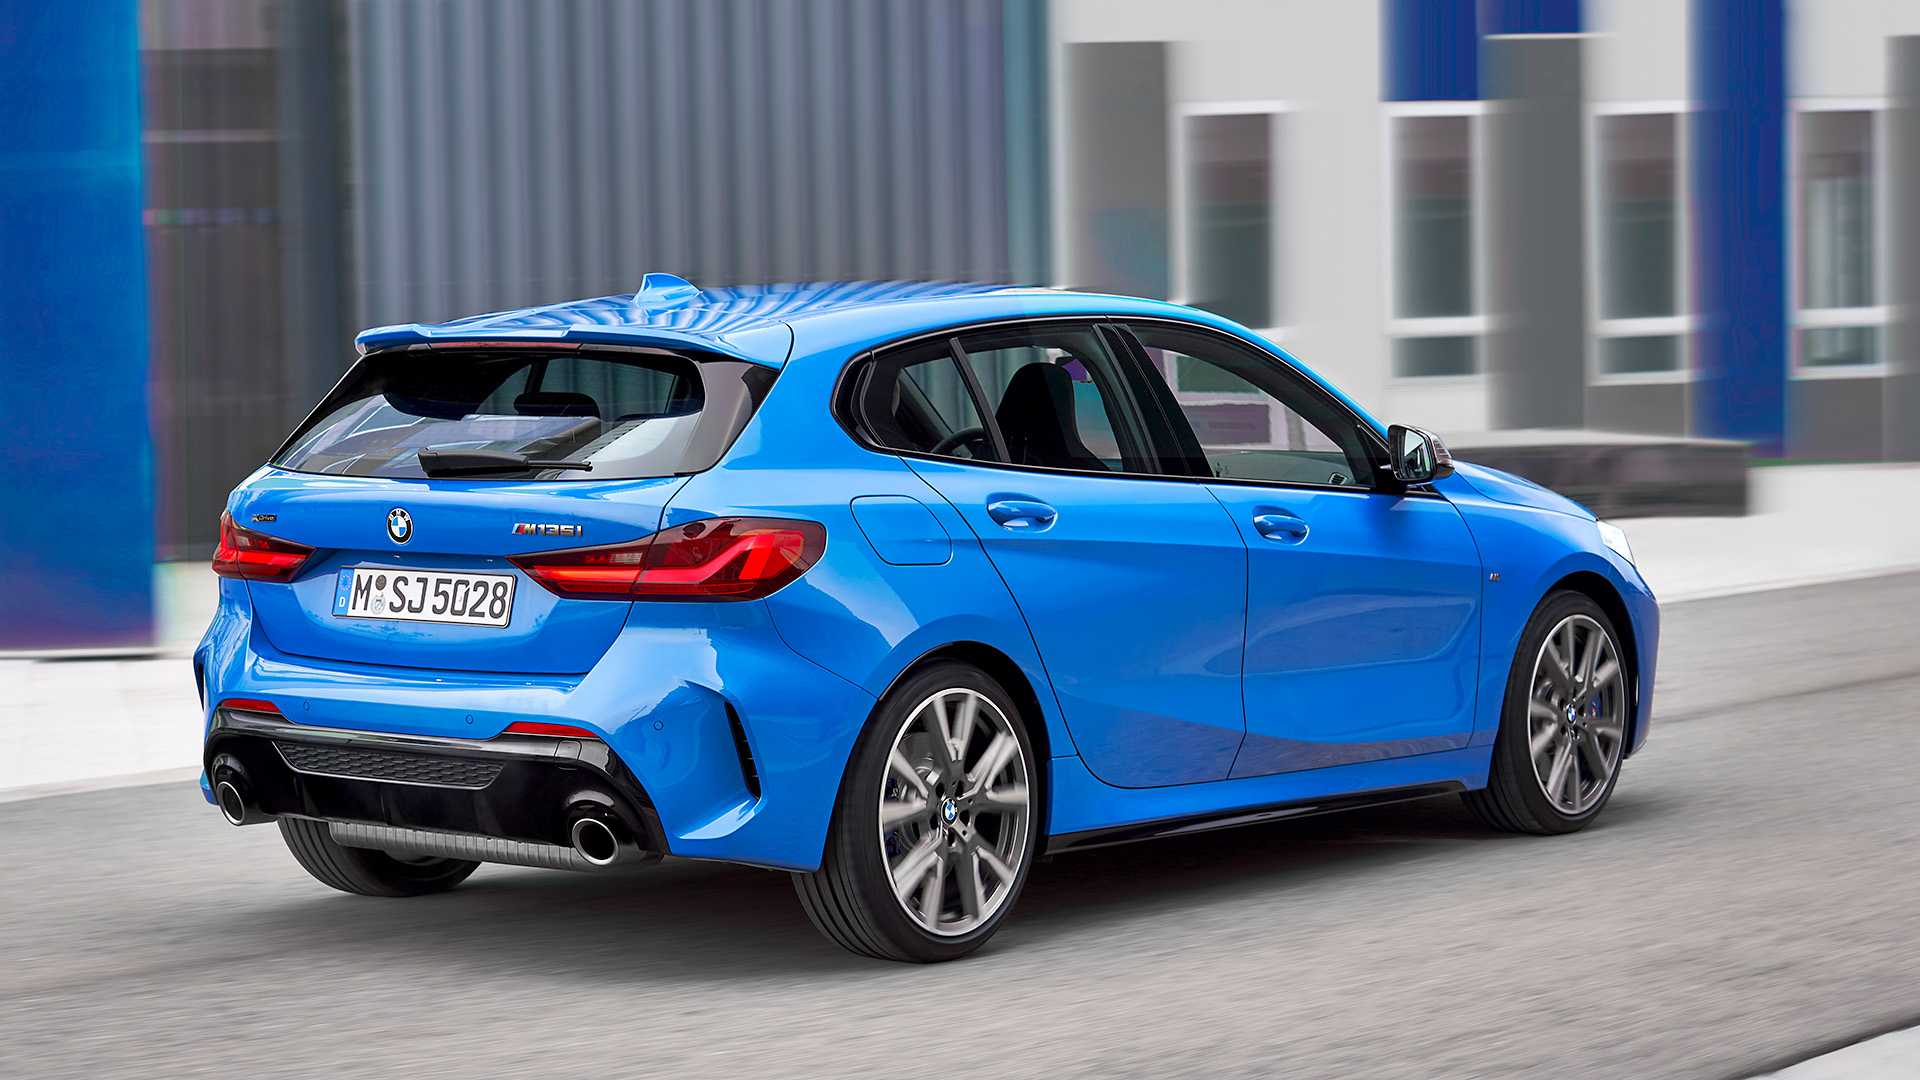 2020 BMW 1 Series Hatchback Debuts With 2.0liter Turbo